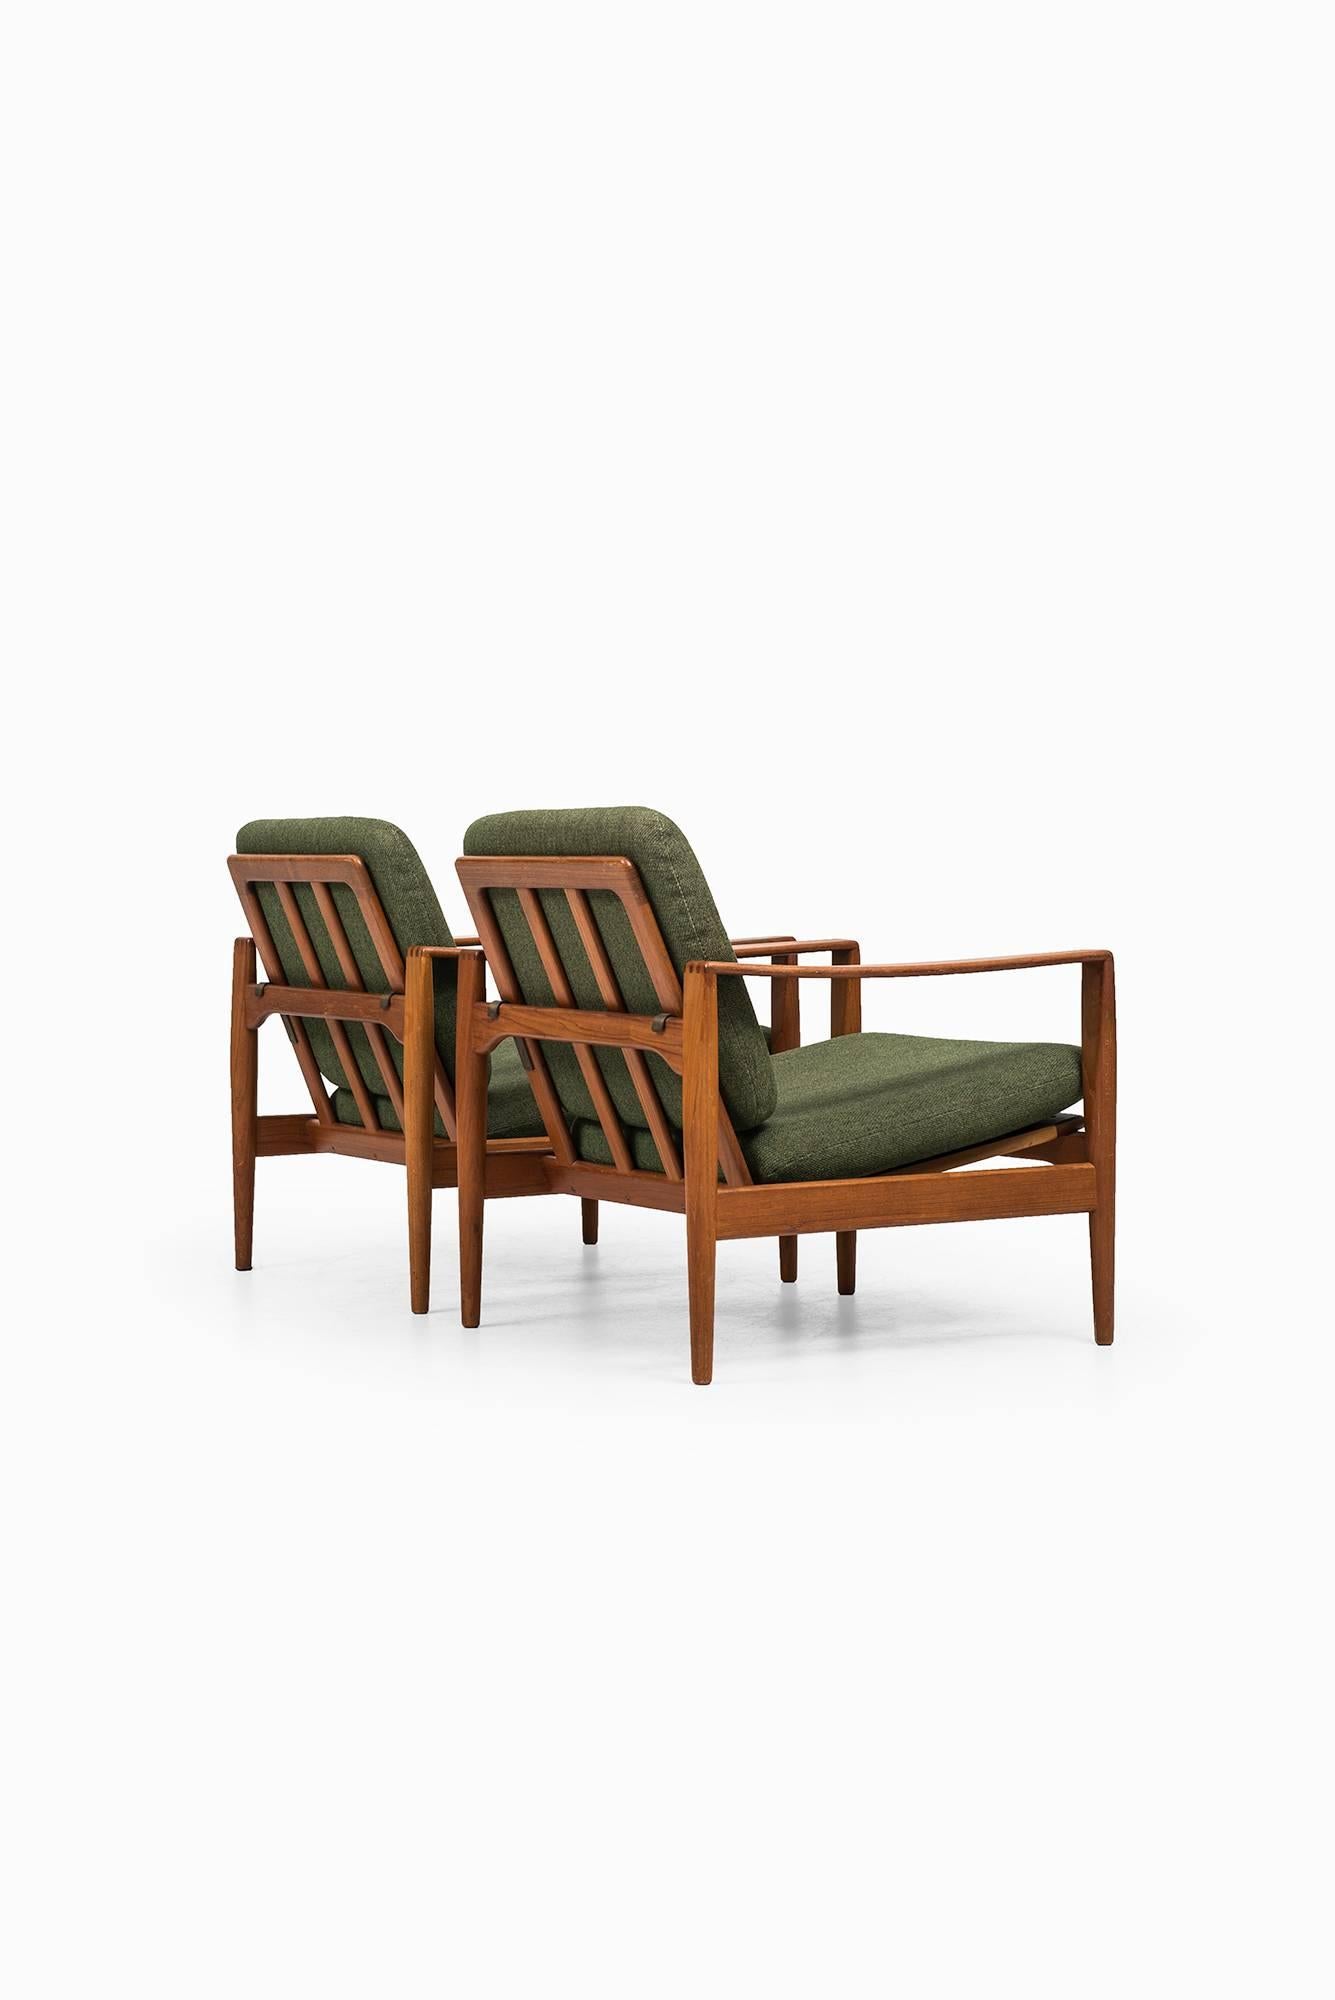 Rare pair of easy chairs designed by Illum Wikkelsø. Produced by Niels Eilersen in Denmark.